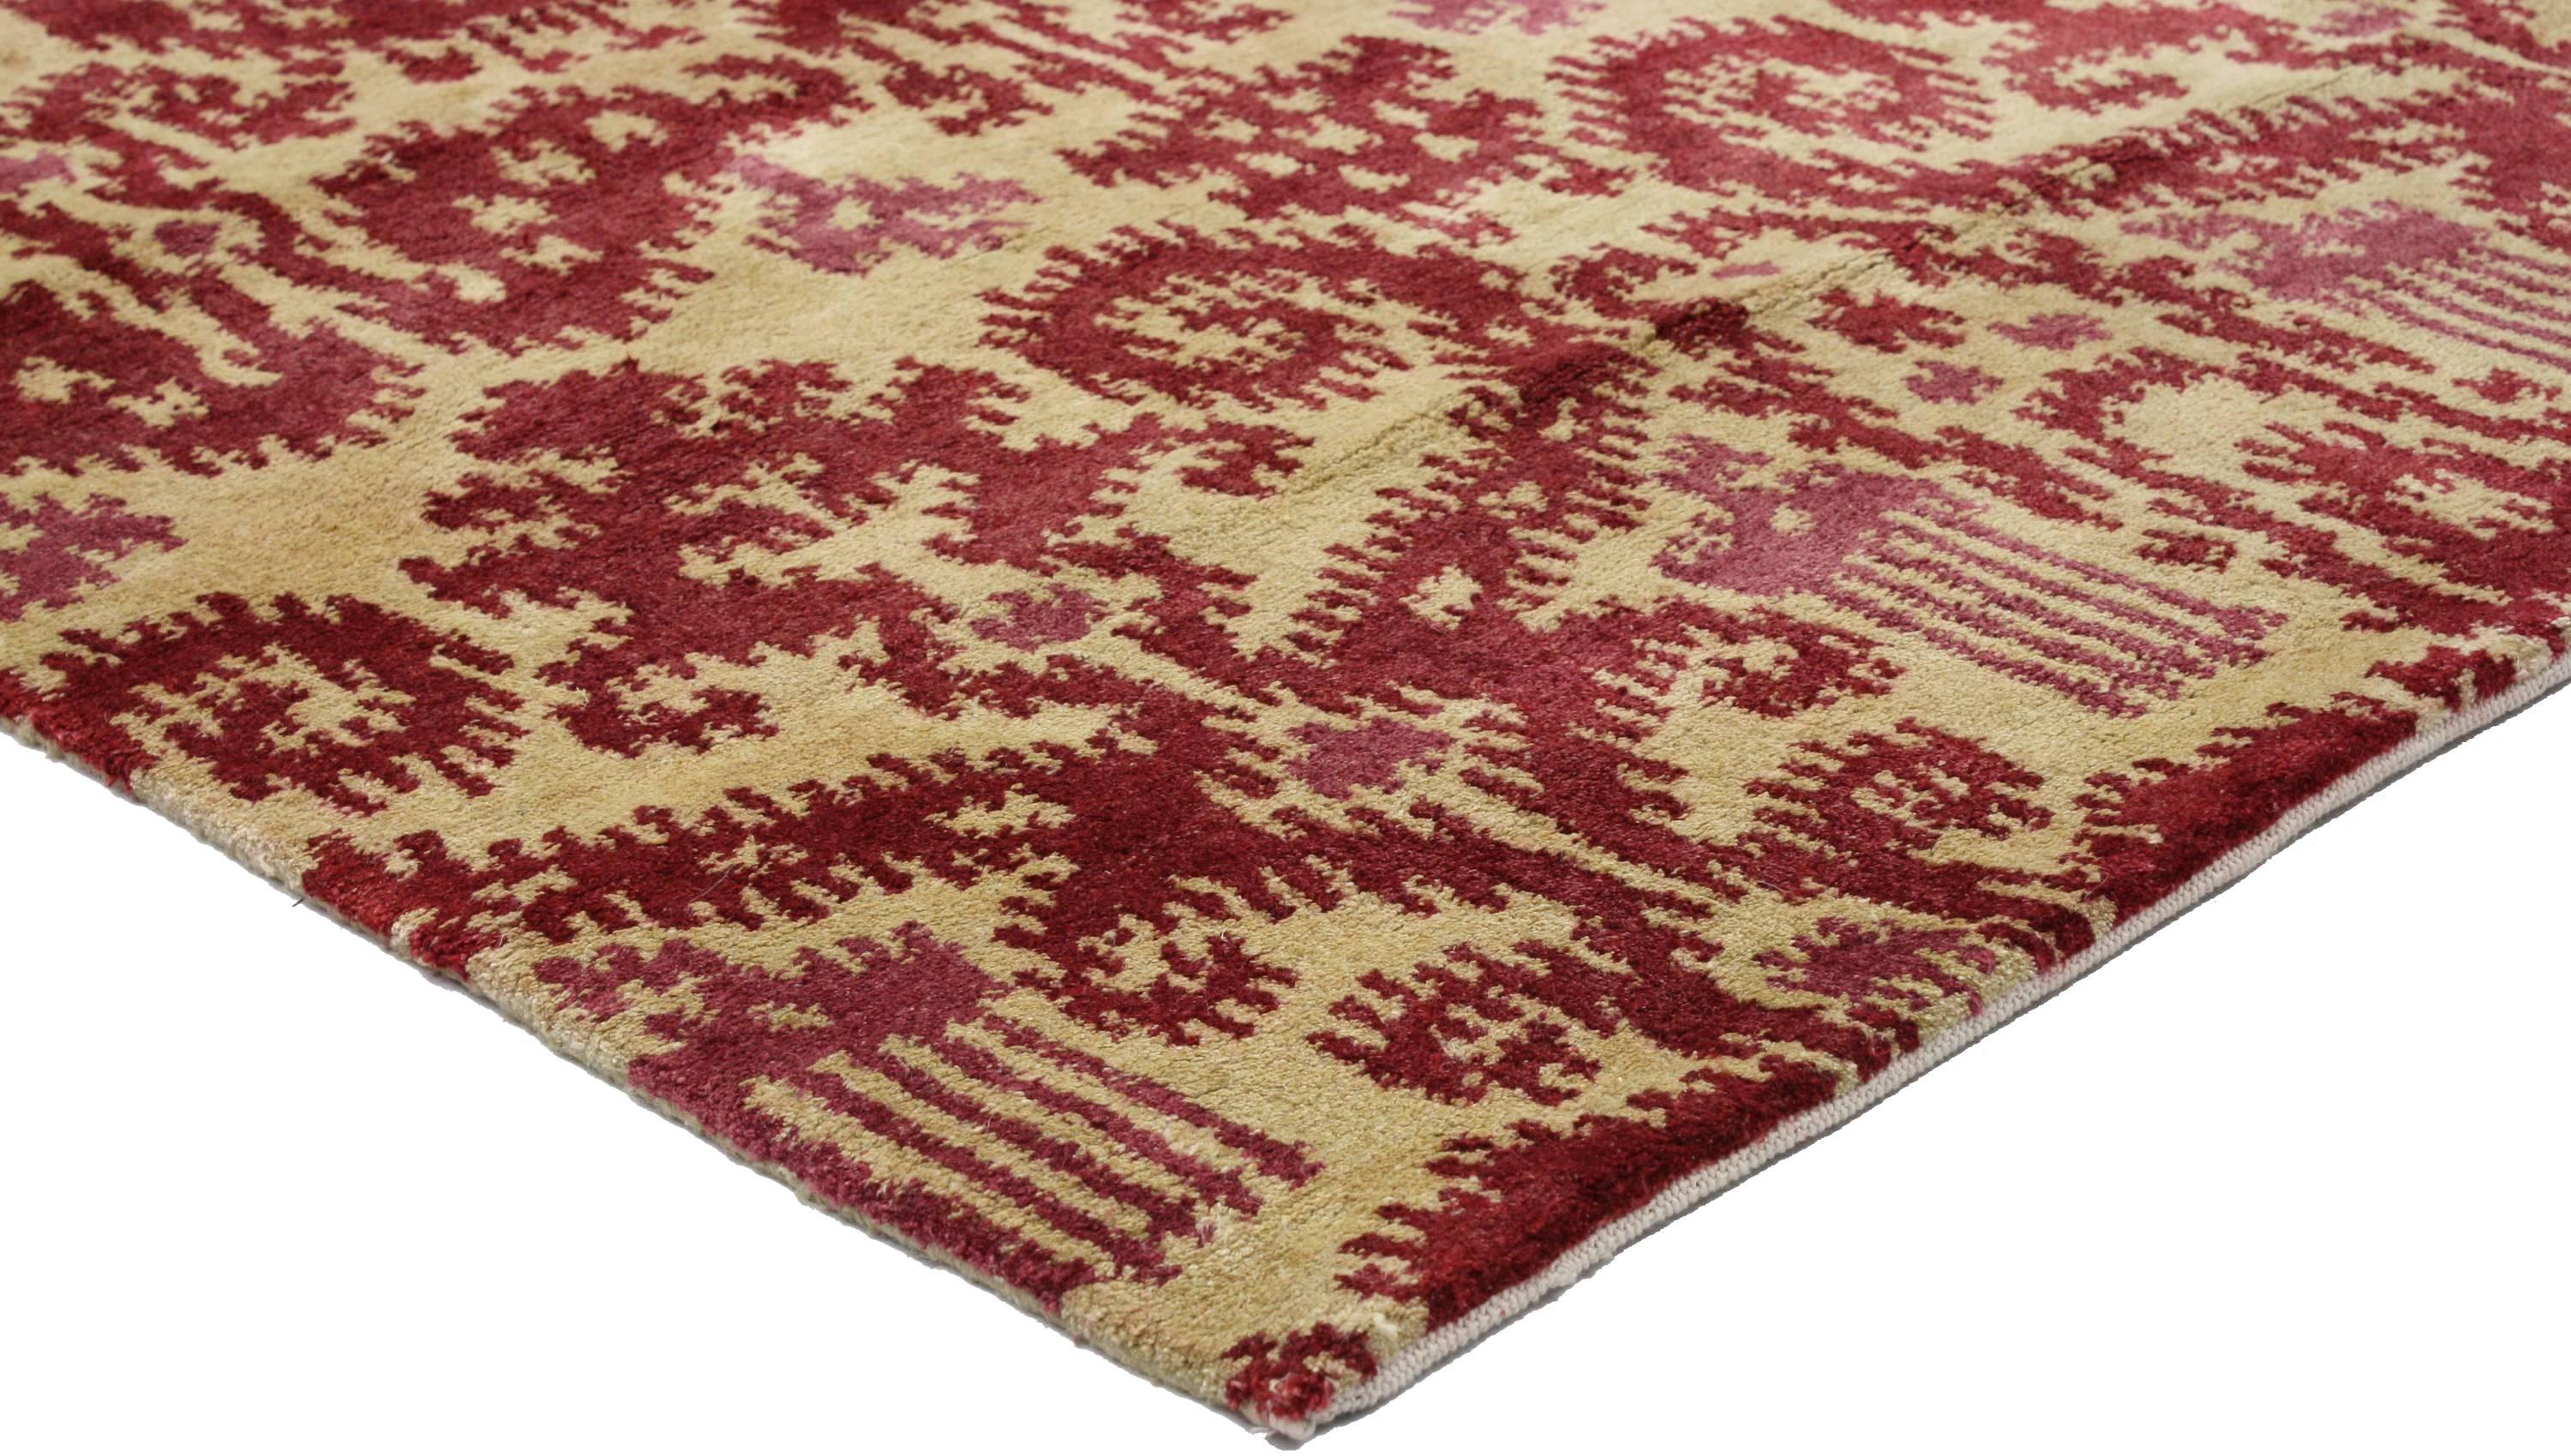 ​​30240 New Contemporary Red Ikat Rug with Modern Style, Accent Rug 03'01 x 04'11. Balancing a timeless design and contrasting colors, this hand-knotted wool contemporary Ikat rug beautifully displays modern style. The tan abrashed field is covered